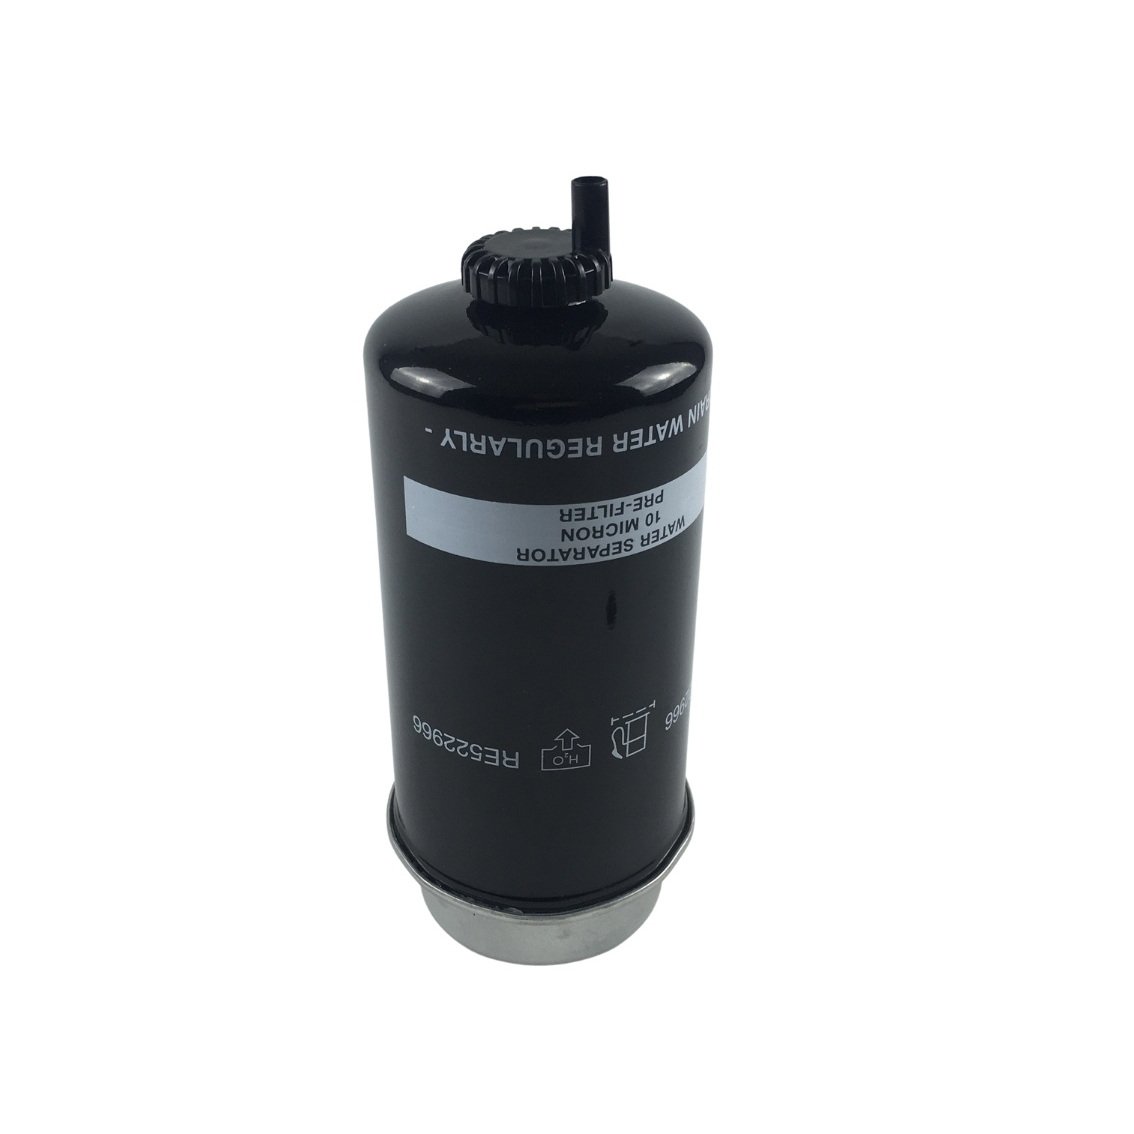 Fuel Filter Reference: S RE522966 FIL Suitable For Agricultural Machinery